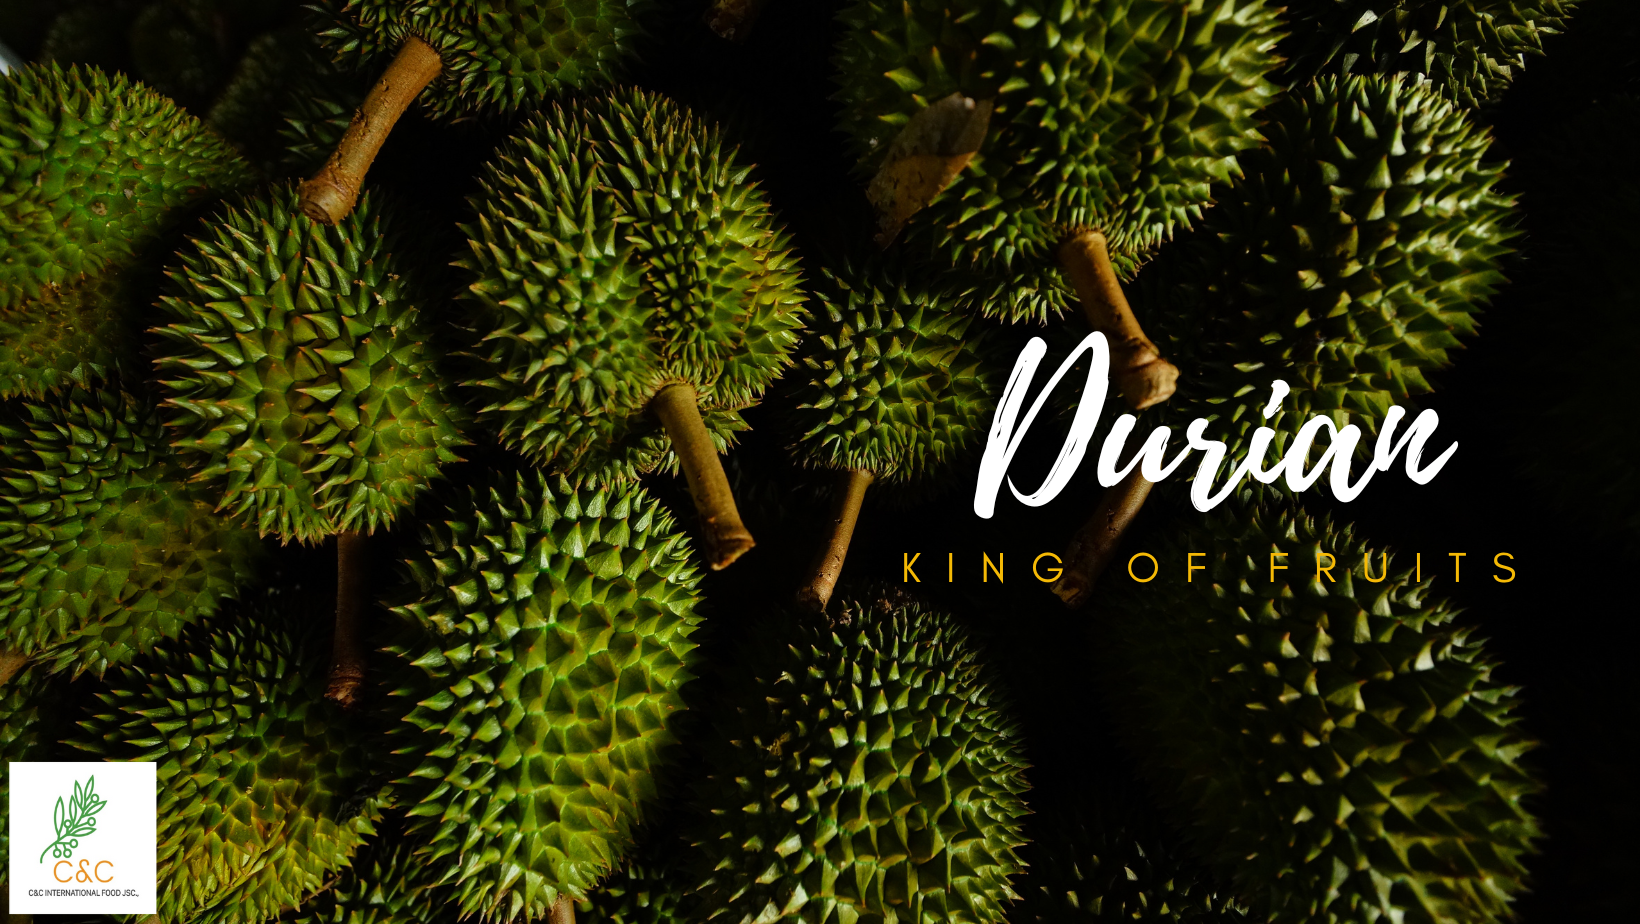 Vietnam and China are currently crazy about durians